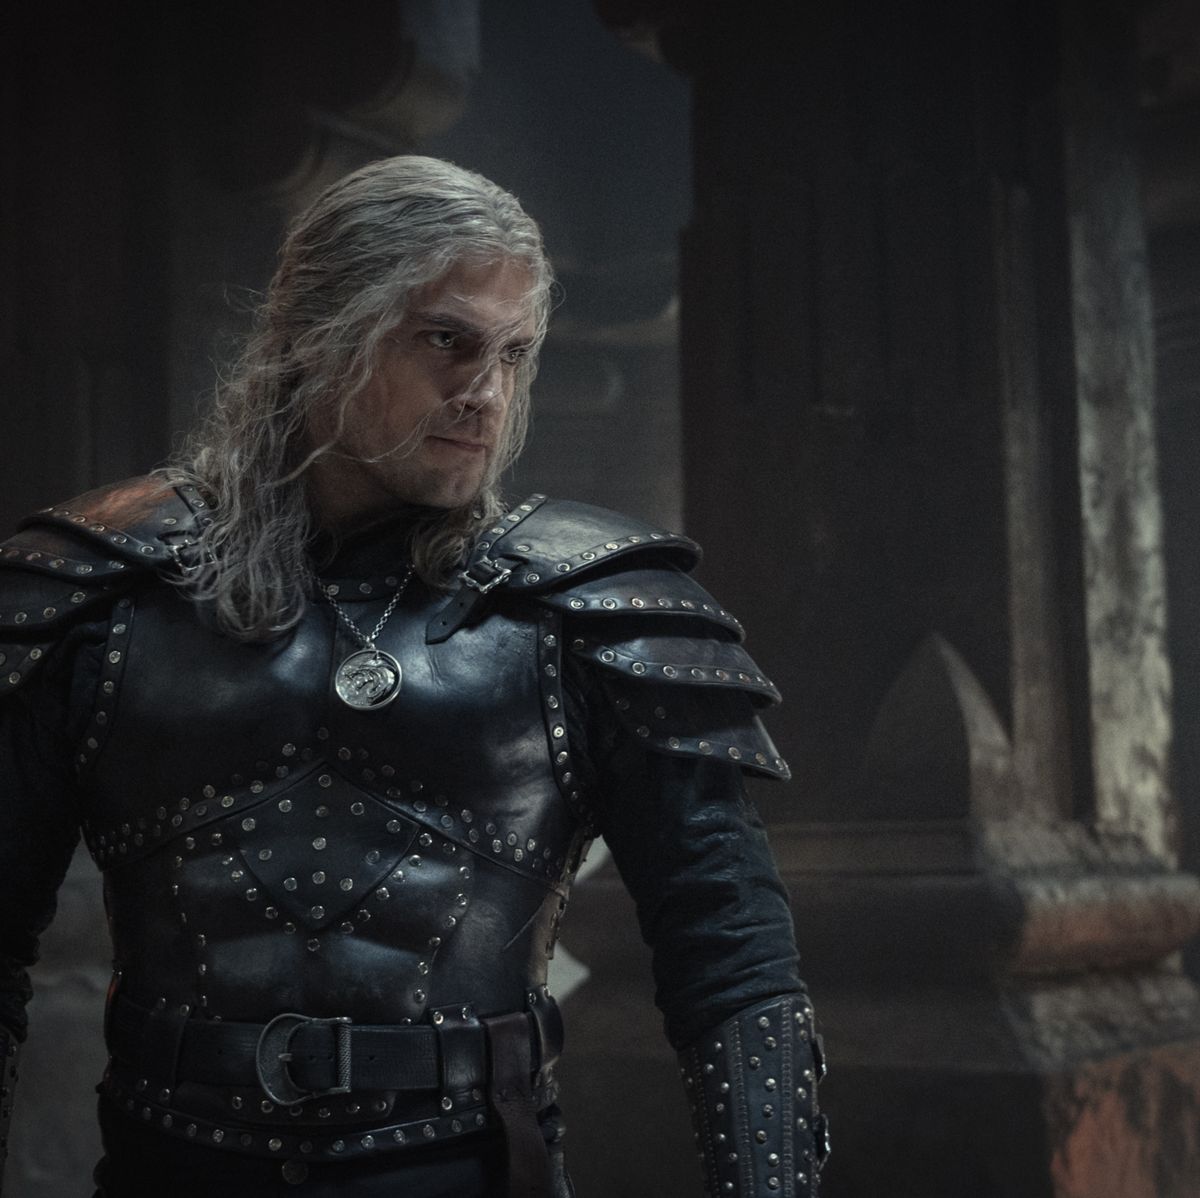 Netflix confirms there will be a third season of The Witcher - The Verge